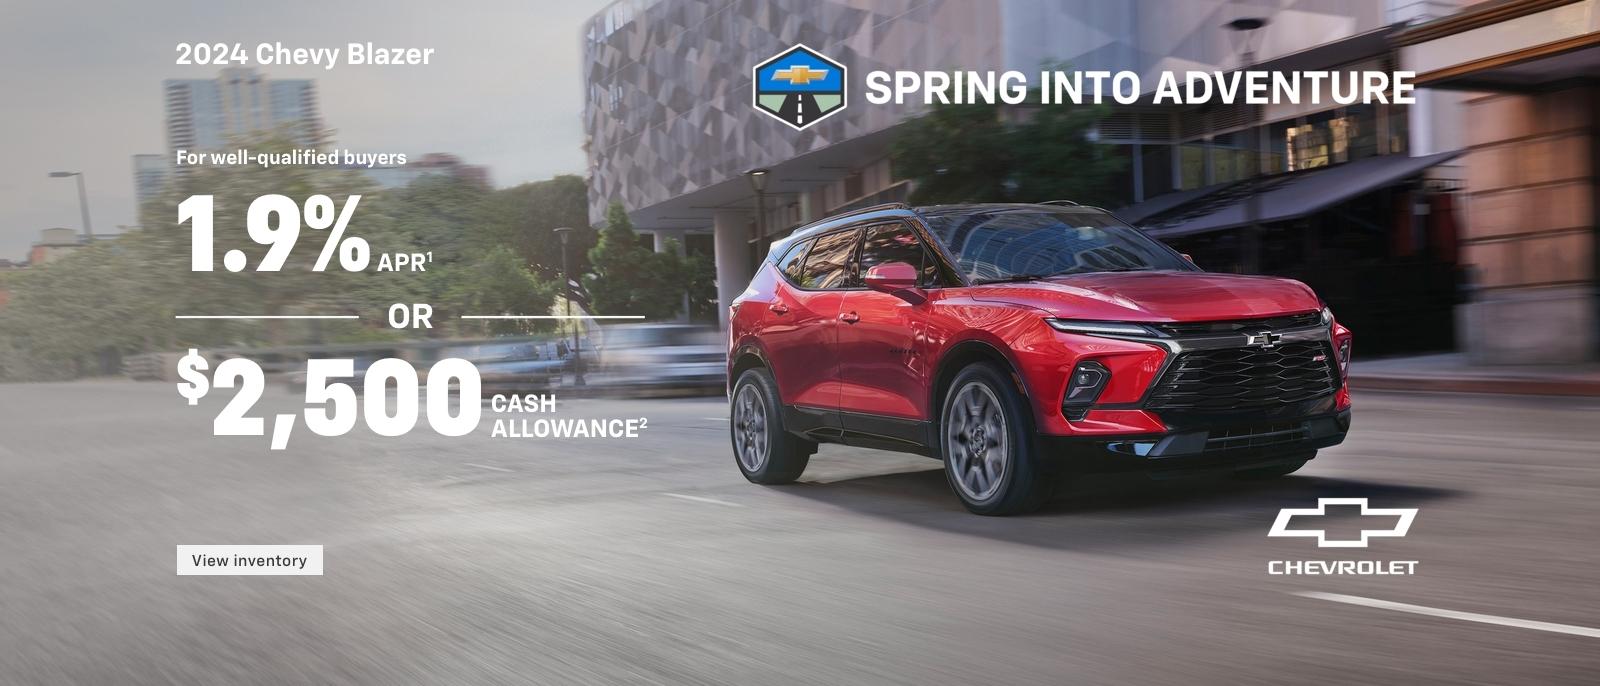 2024 Chevy Blazer. Spring into Adventure. For well-qualified buyers 1.9% APR when you finance with GM Financial. Or, $2,500 cash allowance.